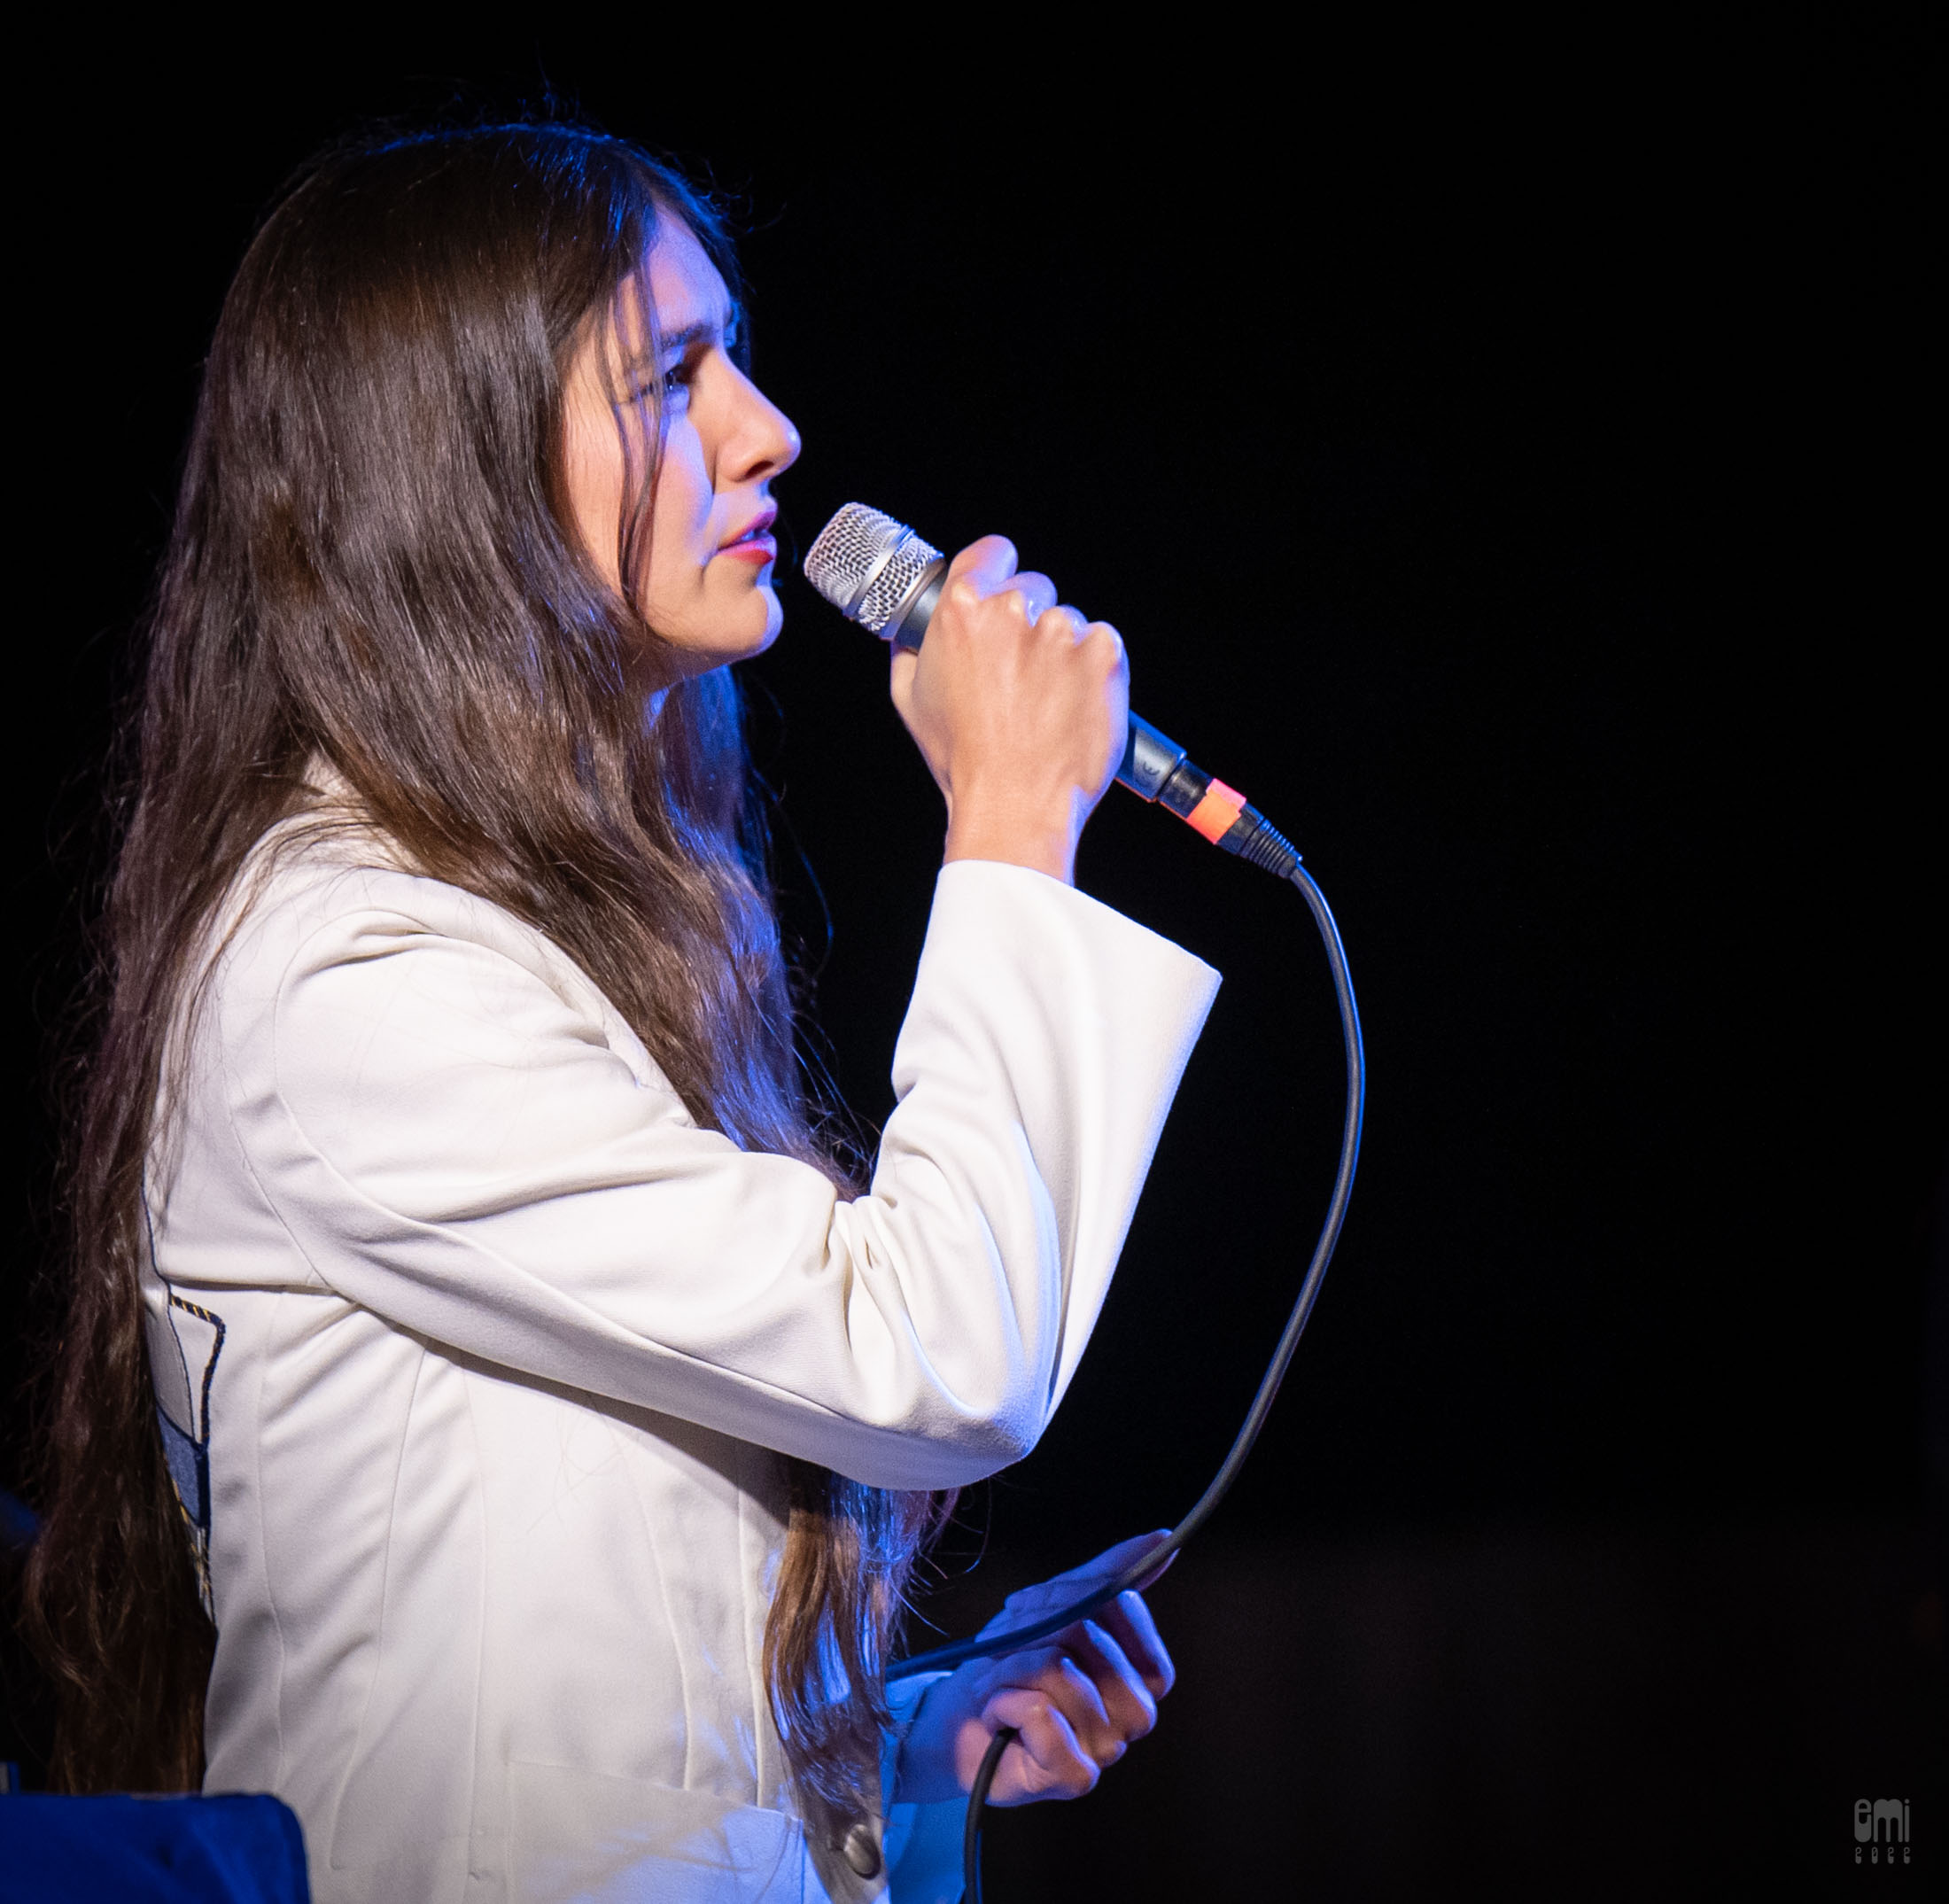 20220528 (((folkYEAH!))) Presents Weyes Blood at Henry Miller Memorial Library, Big Sur, CA. photo by emi